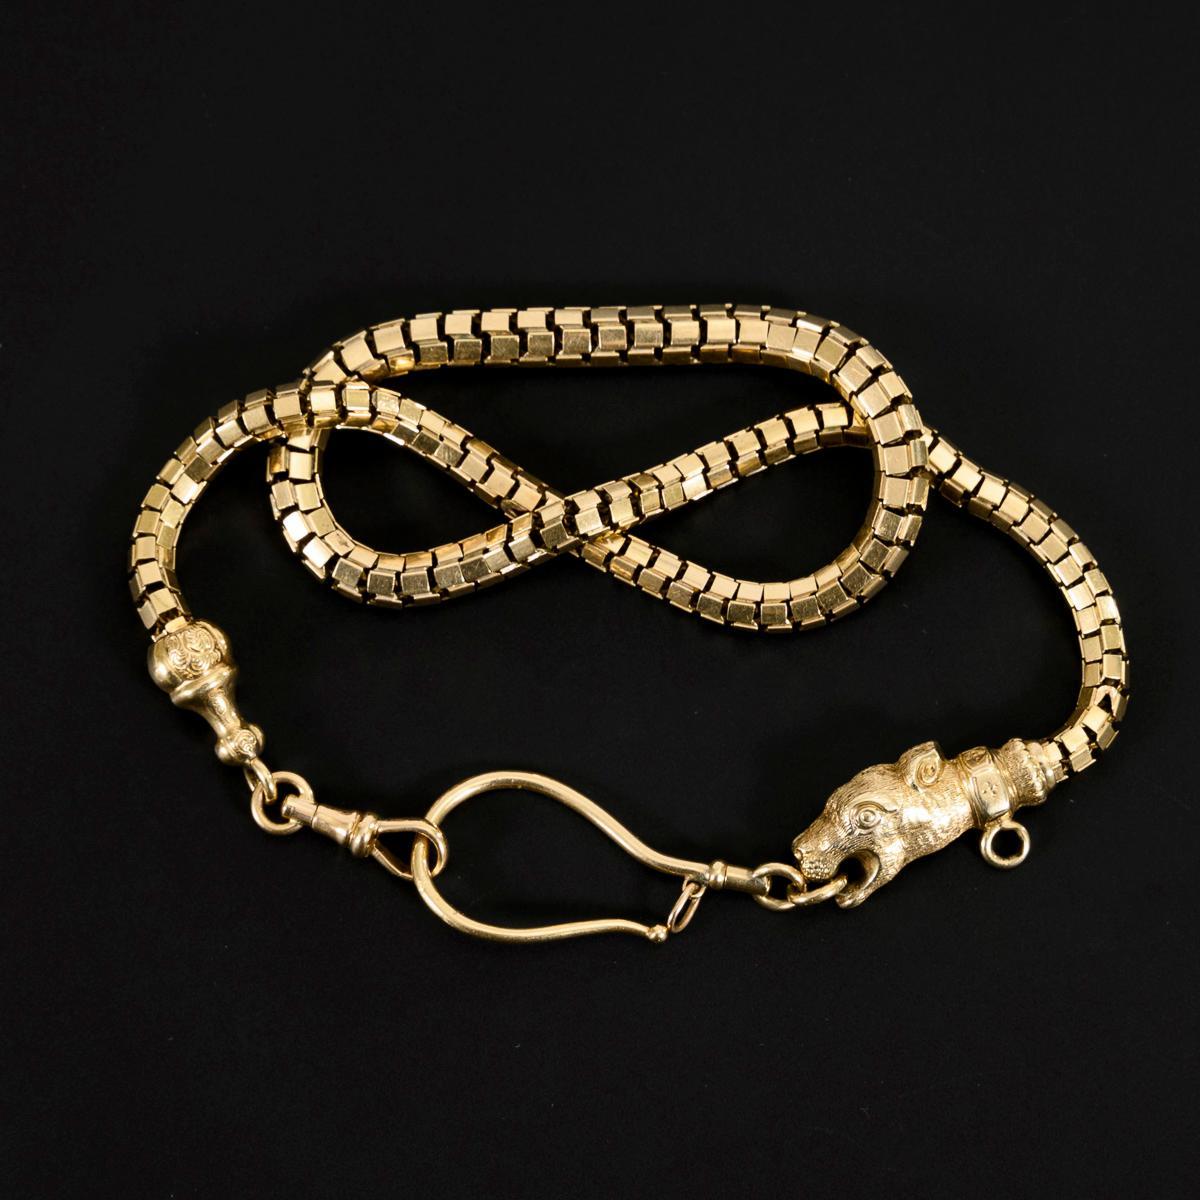 An extremely rare and highly collectable antique gold chain necklace in solid 18ct yellow gold. This versatile chain can be worn as a necklace or as a chunky chain bracelet (as shown on the photos). The chain is preserved in a superb state and has